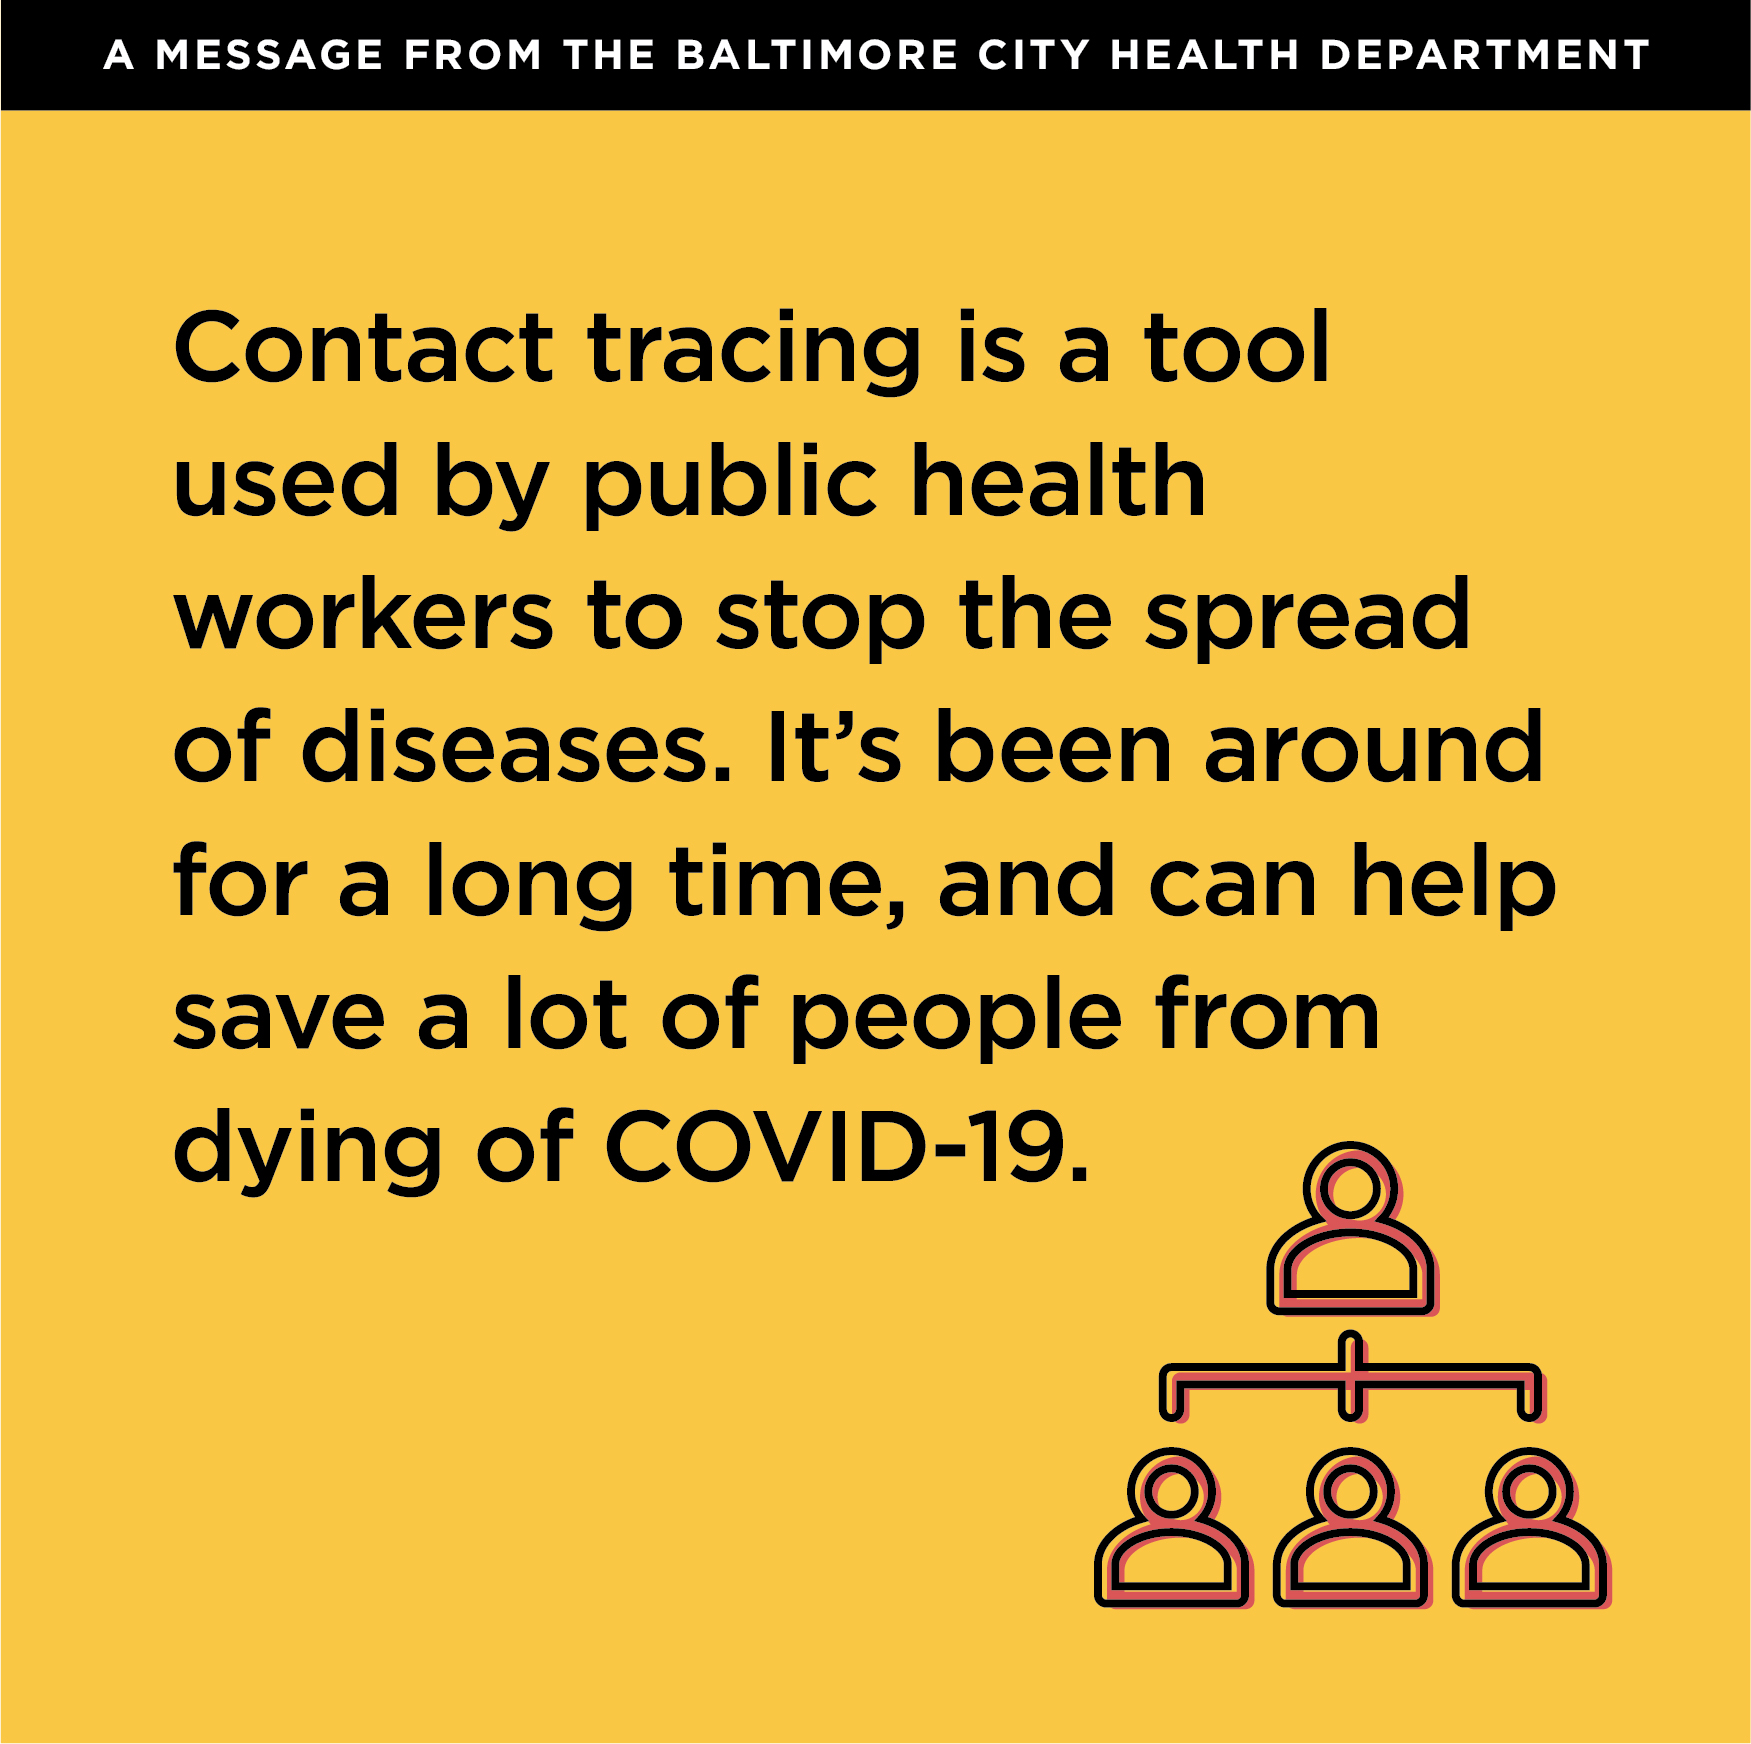 Contact tracing is a tool used by public health workers to stop the spread of disease